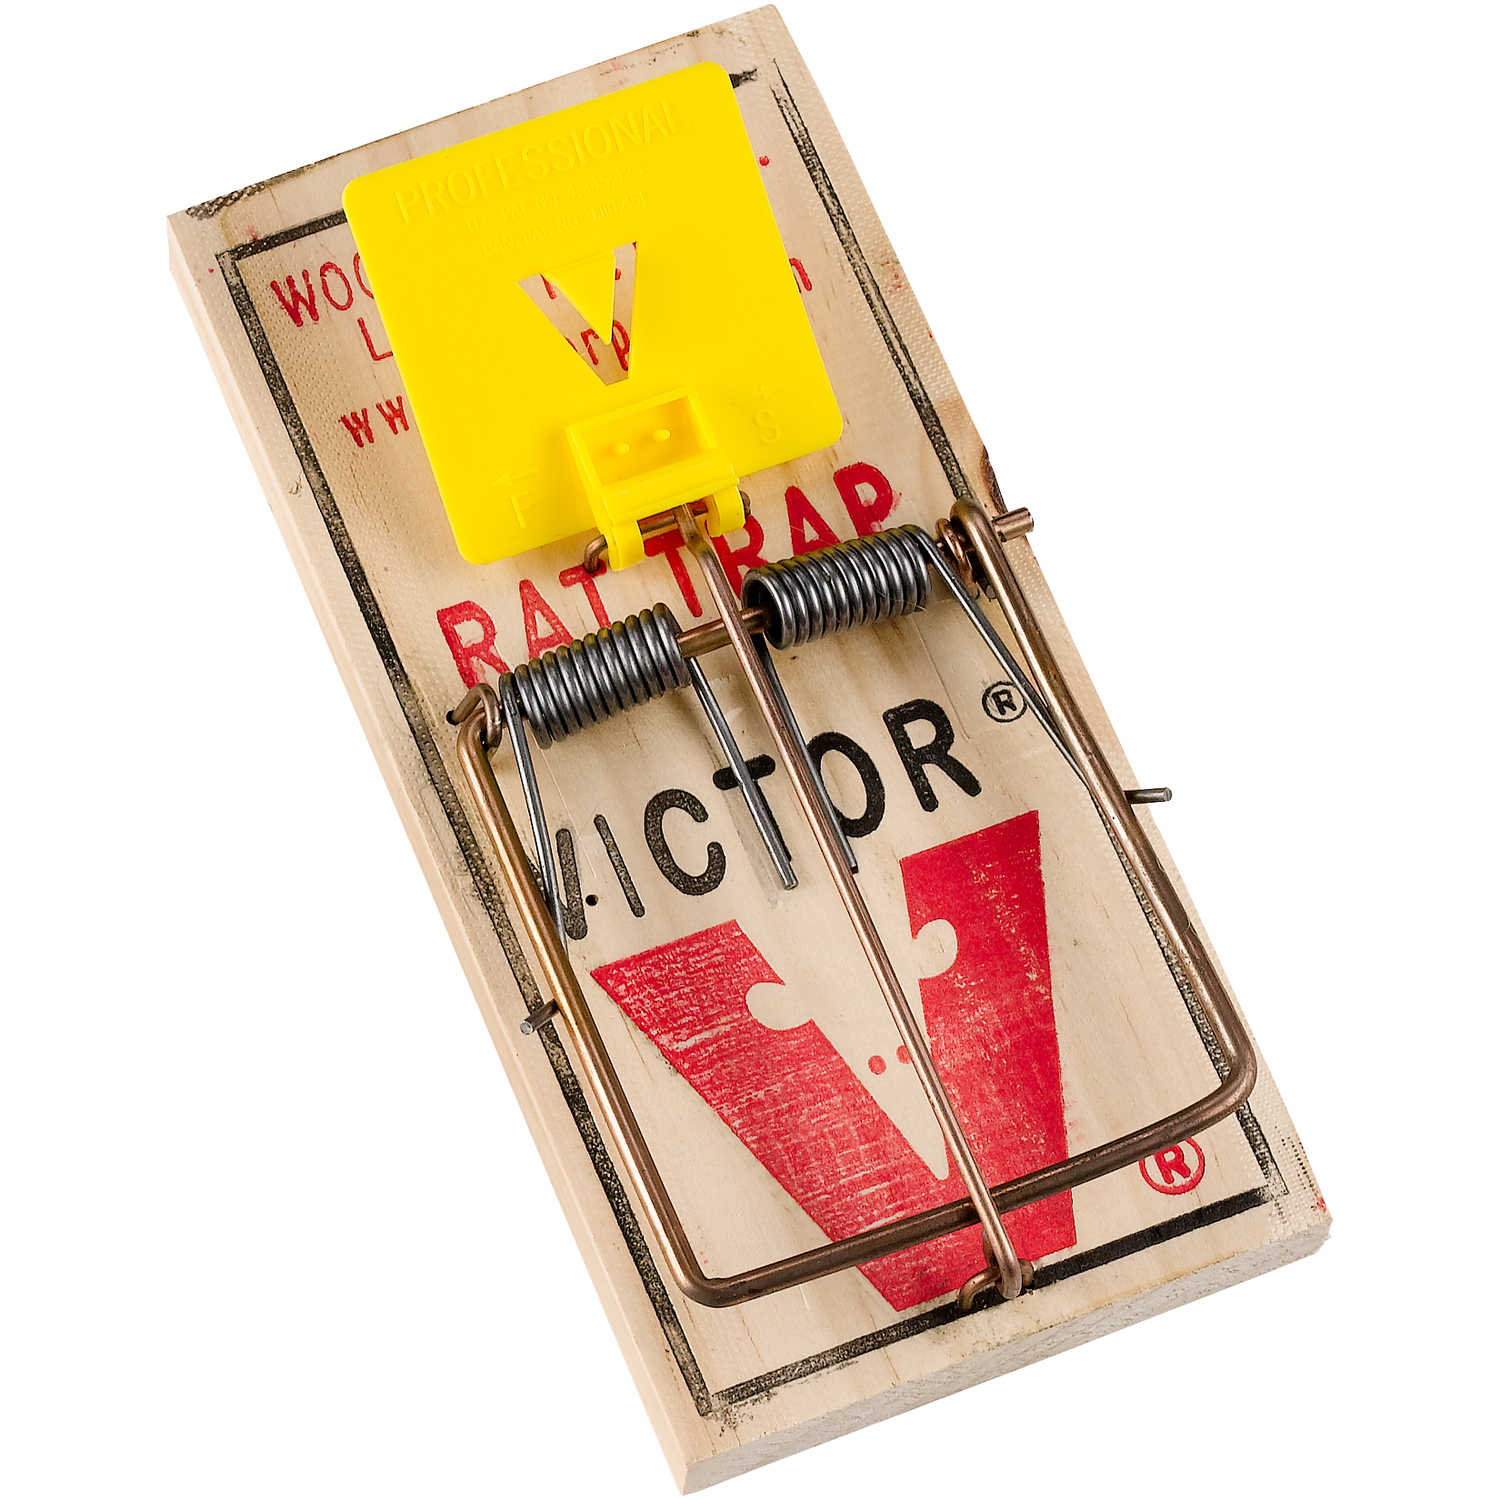 Victor Easy Set Mouse Traps, Pre-Baited - 2 traps